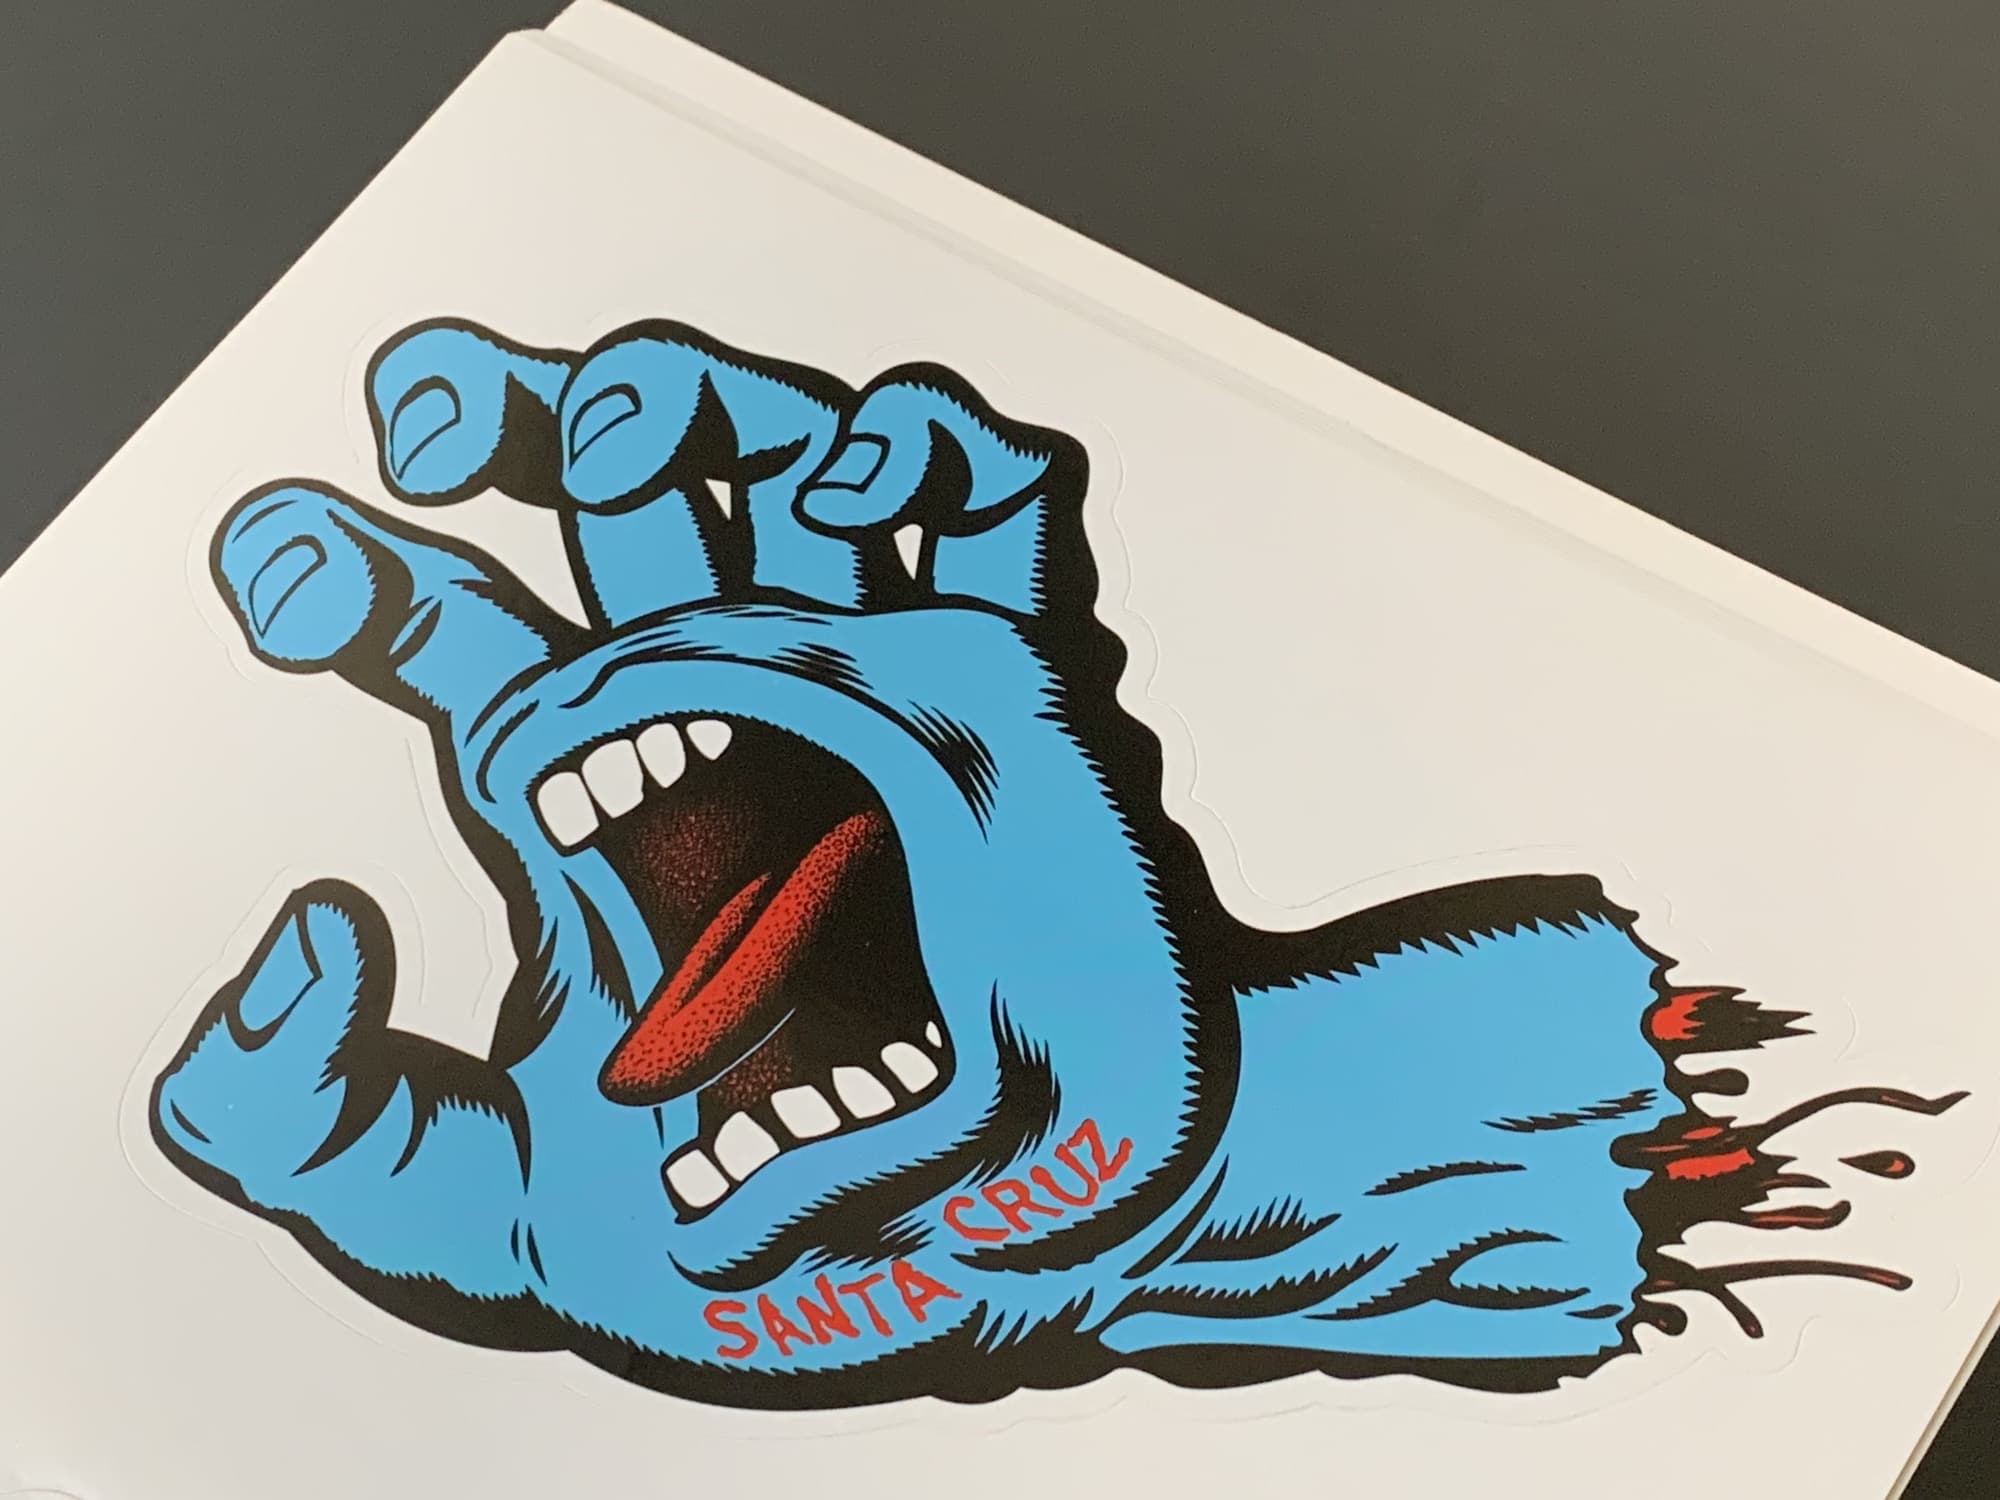 The Santa Cruz Screaming Hand is an excellent skateboard sticker for your MacBook.